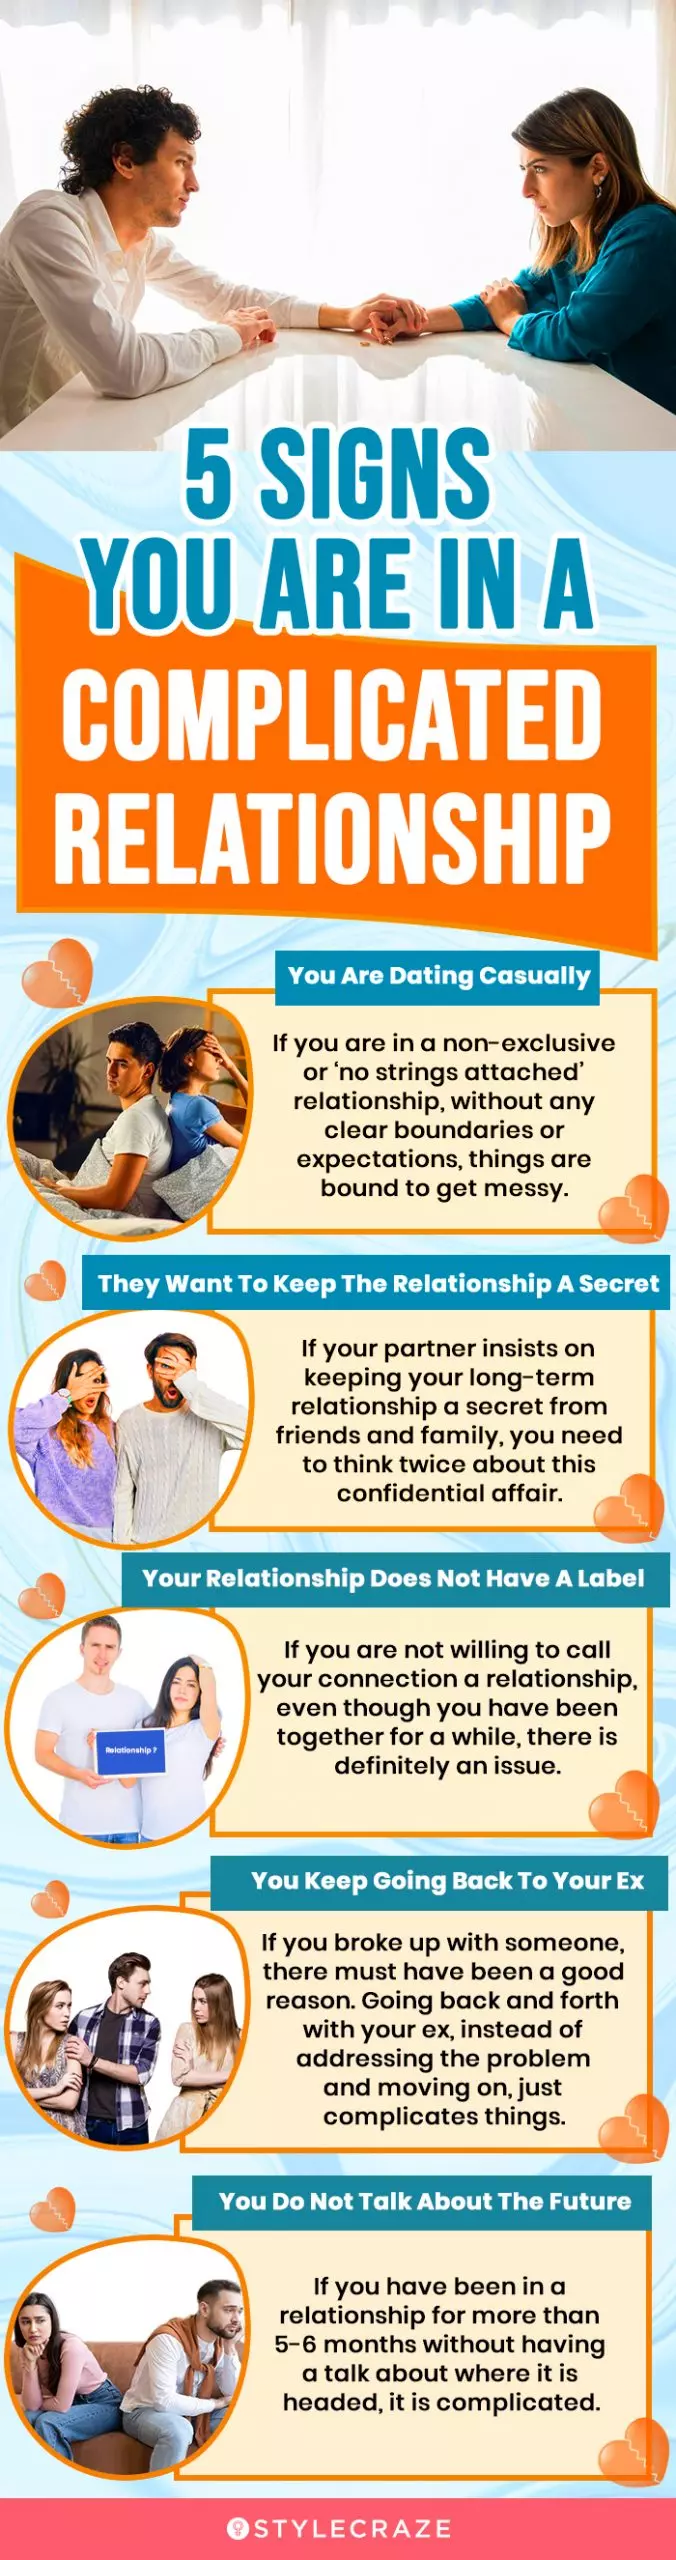 5 signs that you are in a complicated relationship (infographic)